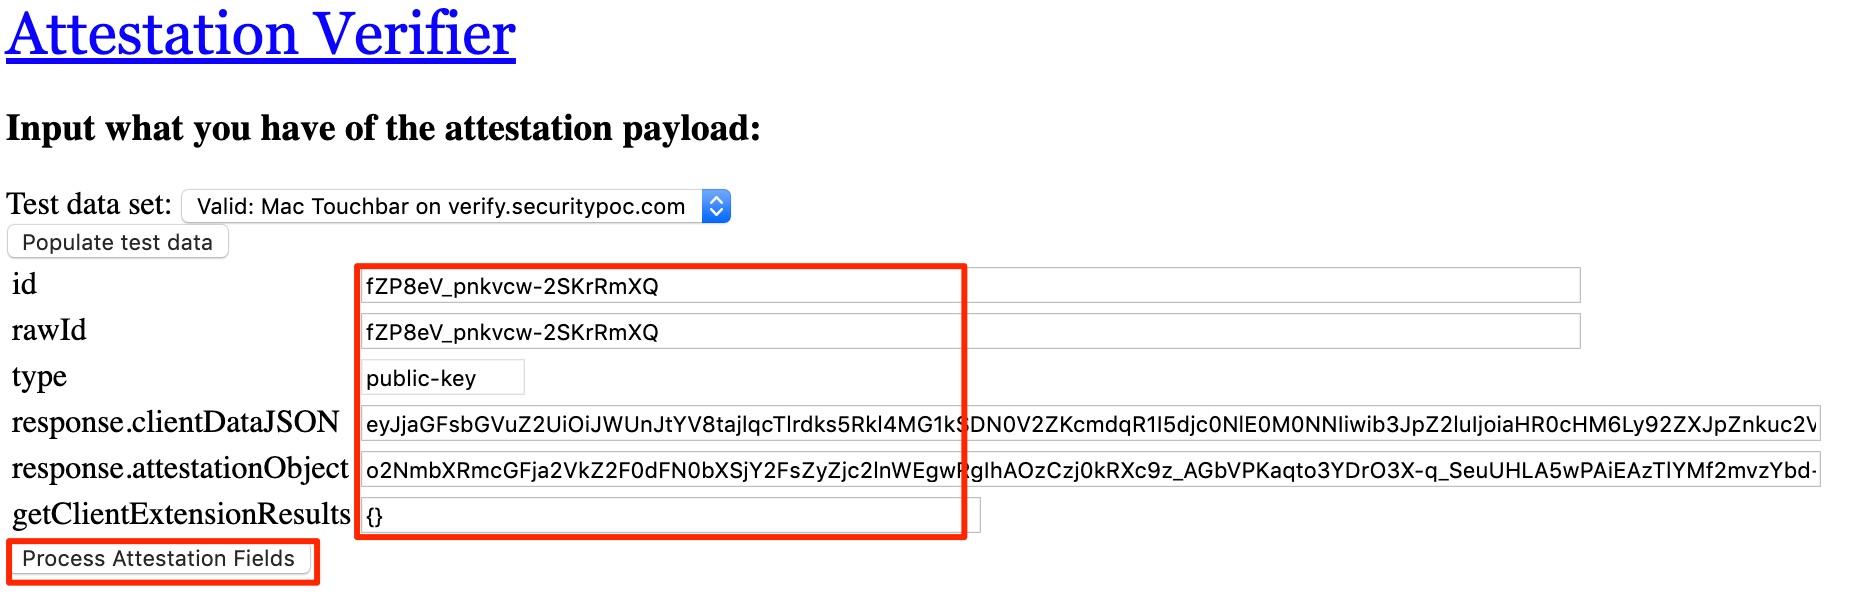 Paste the result payload fields into the Attestation Verifier